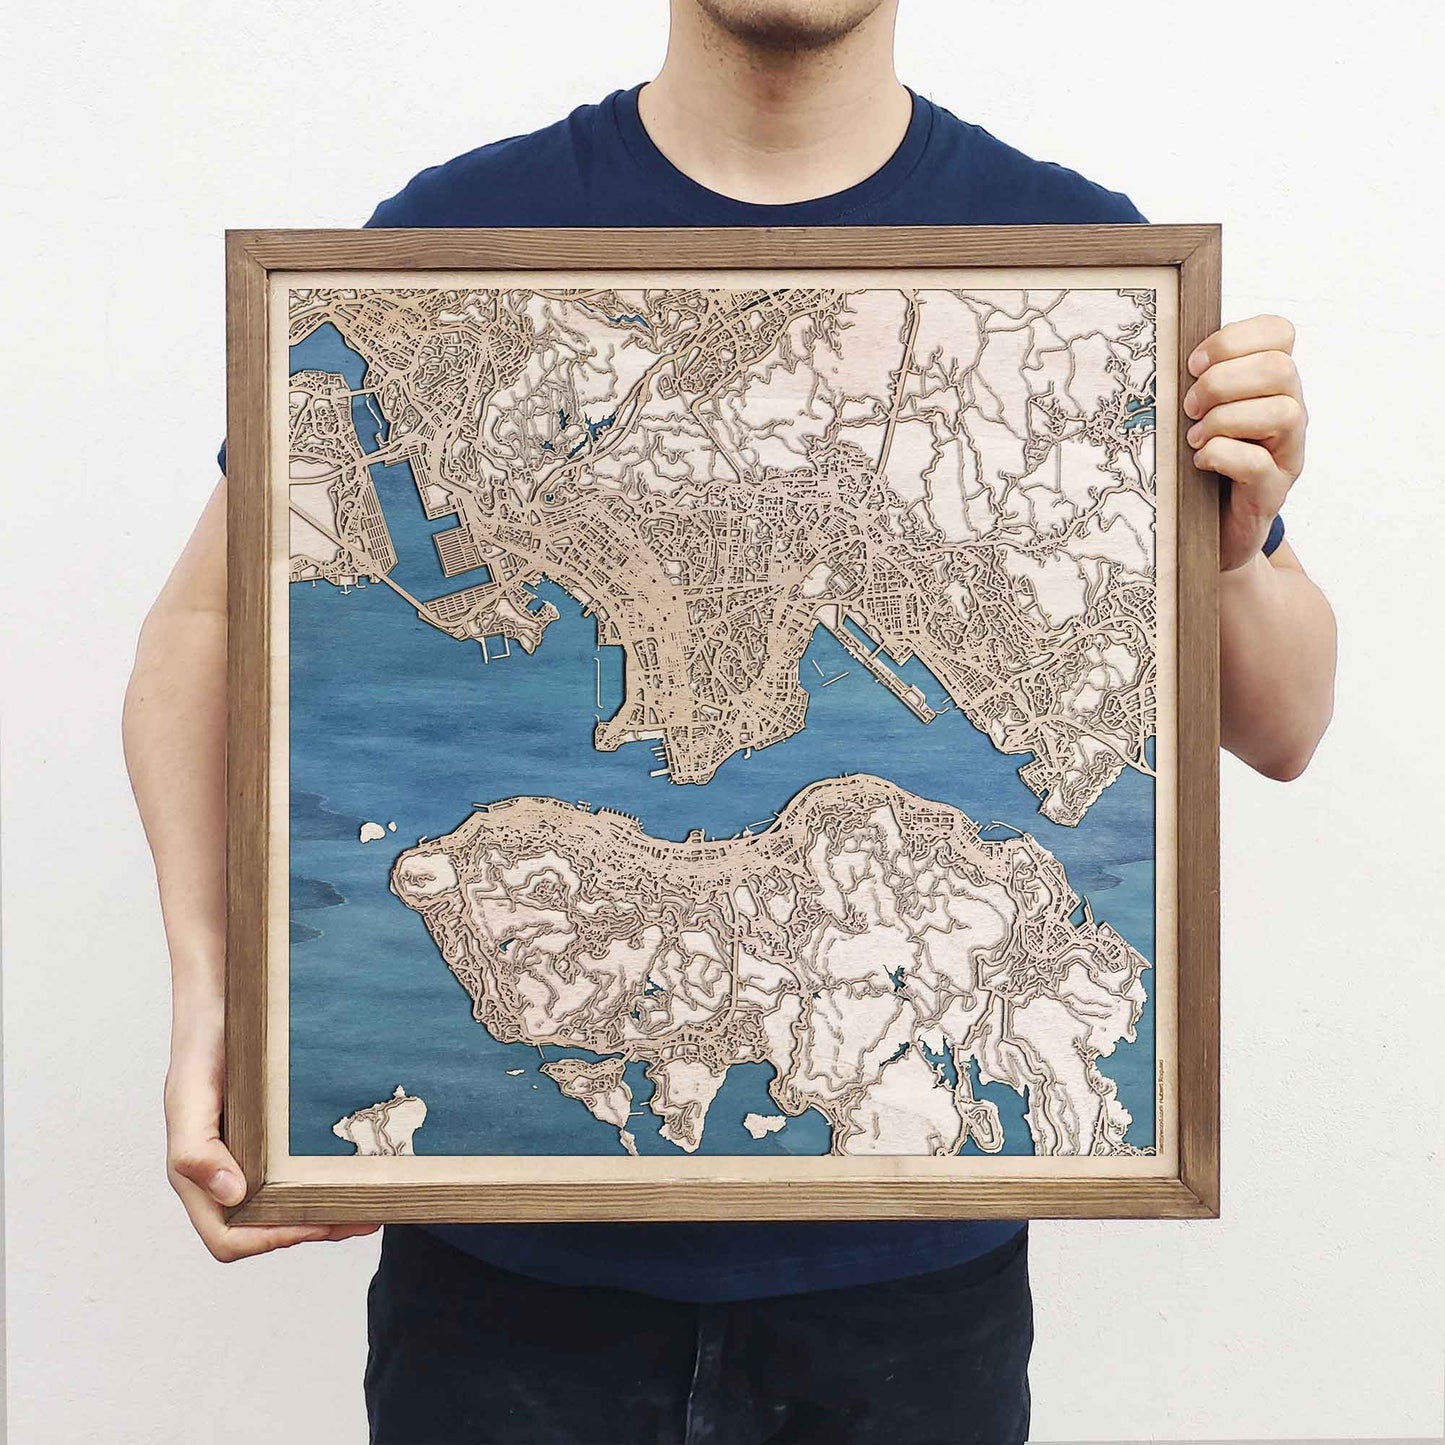 Hong Kong Wooden Map by CityWood - Custom Wood Map Art - Unique Laser Cut Engraved - Anniversary Gift